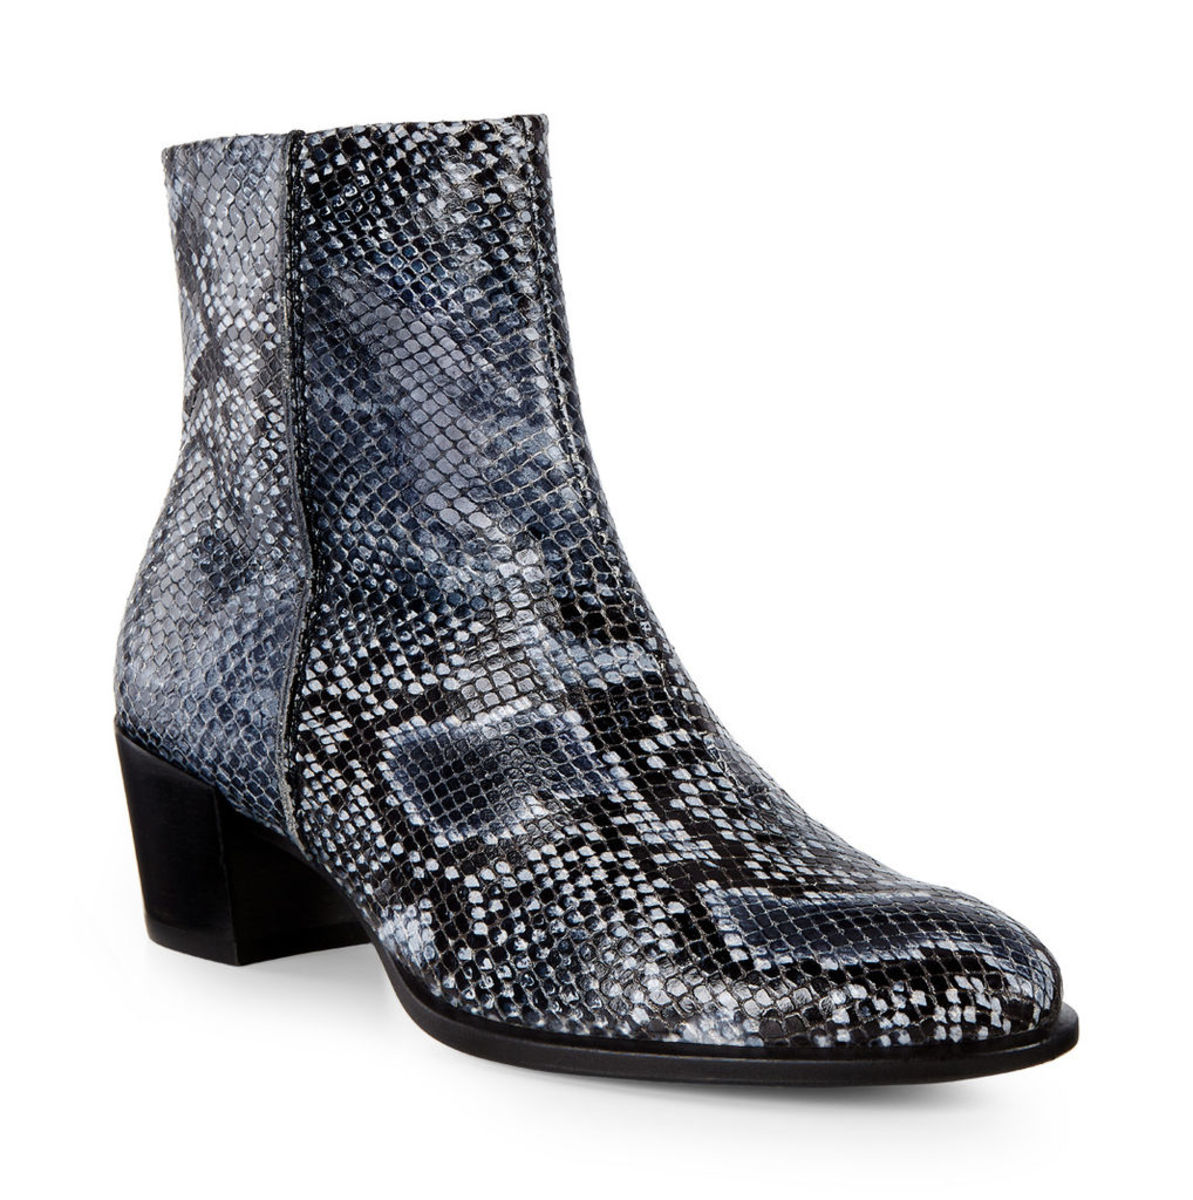 Ecco Shape 35 Snakeskin Boot in True Navy, $139.99 (from $180), available at Ecco.